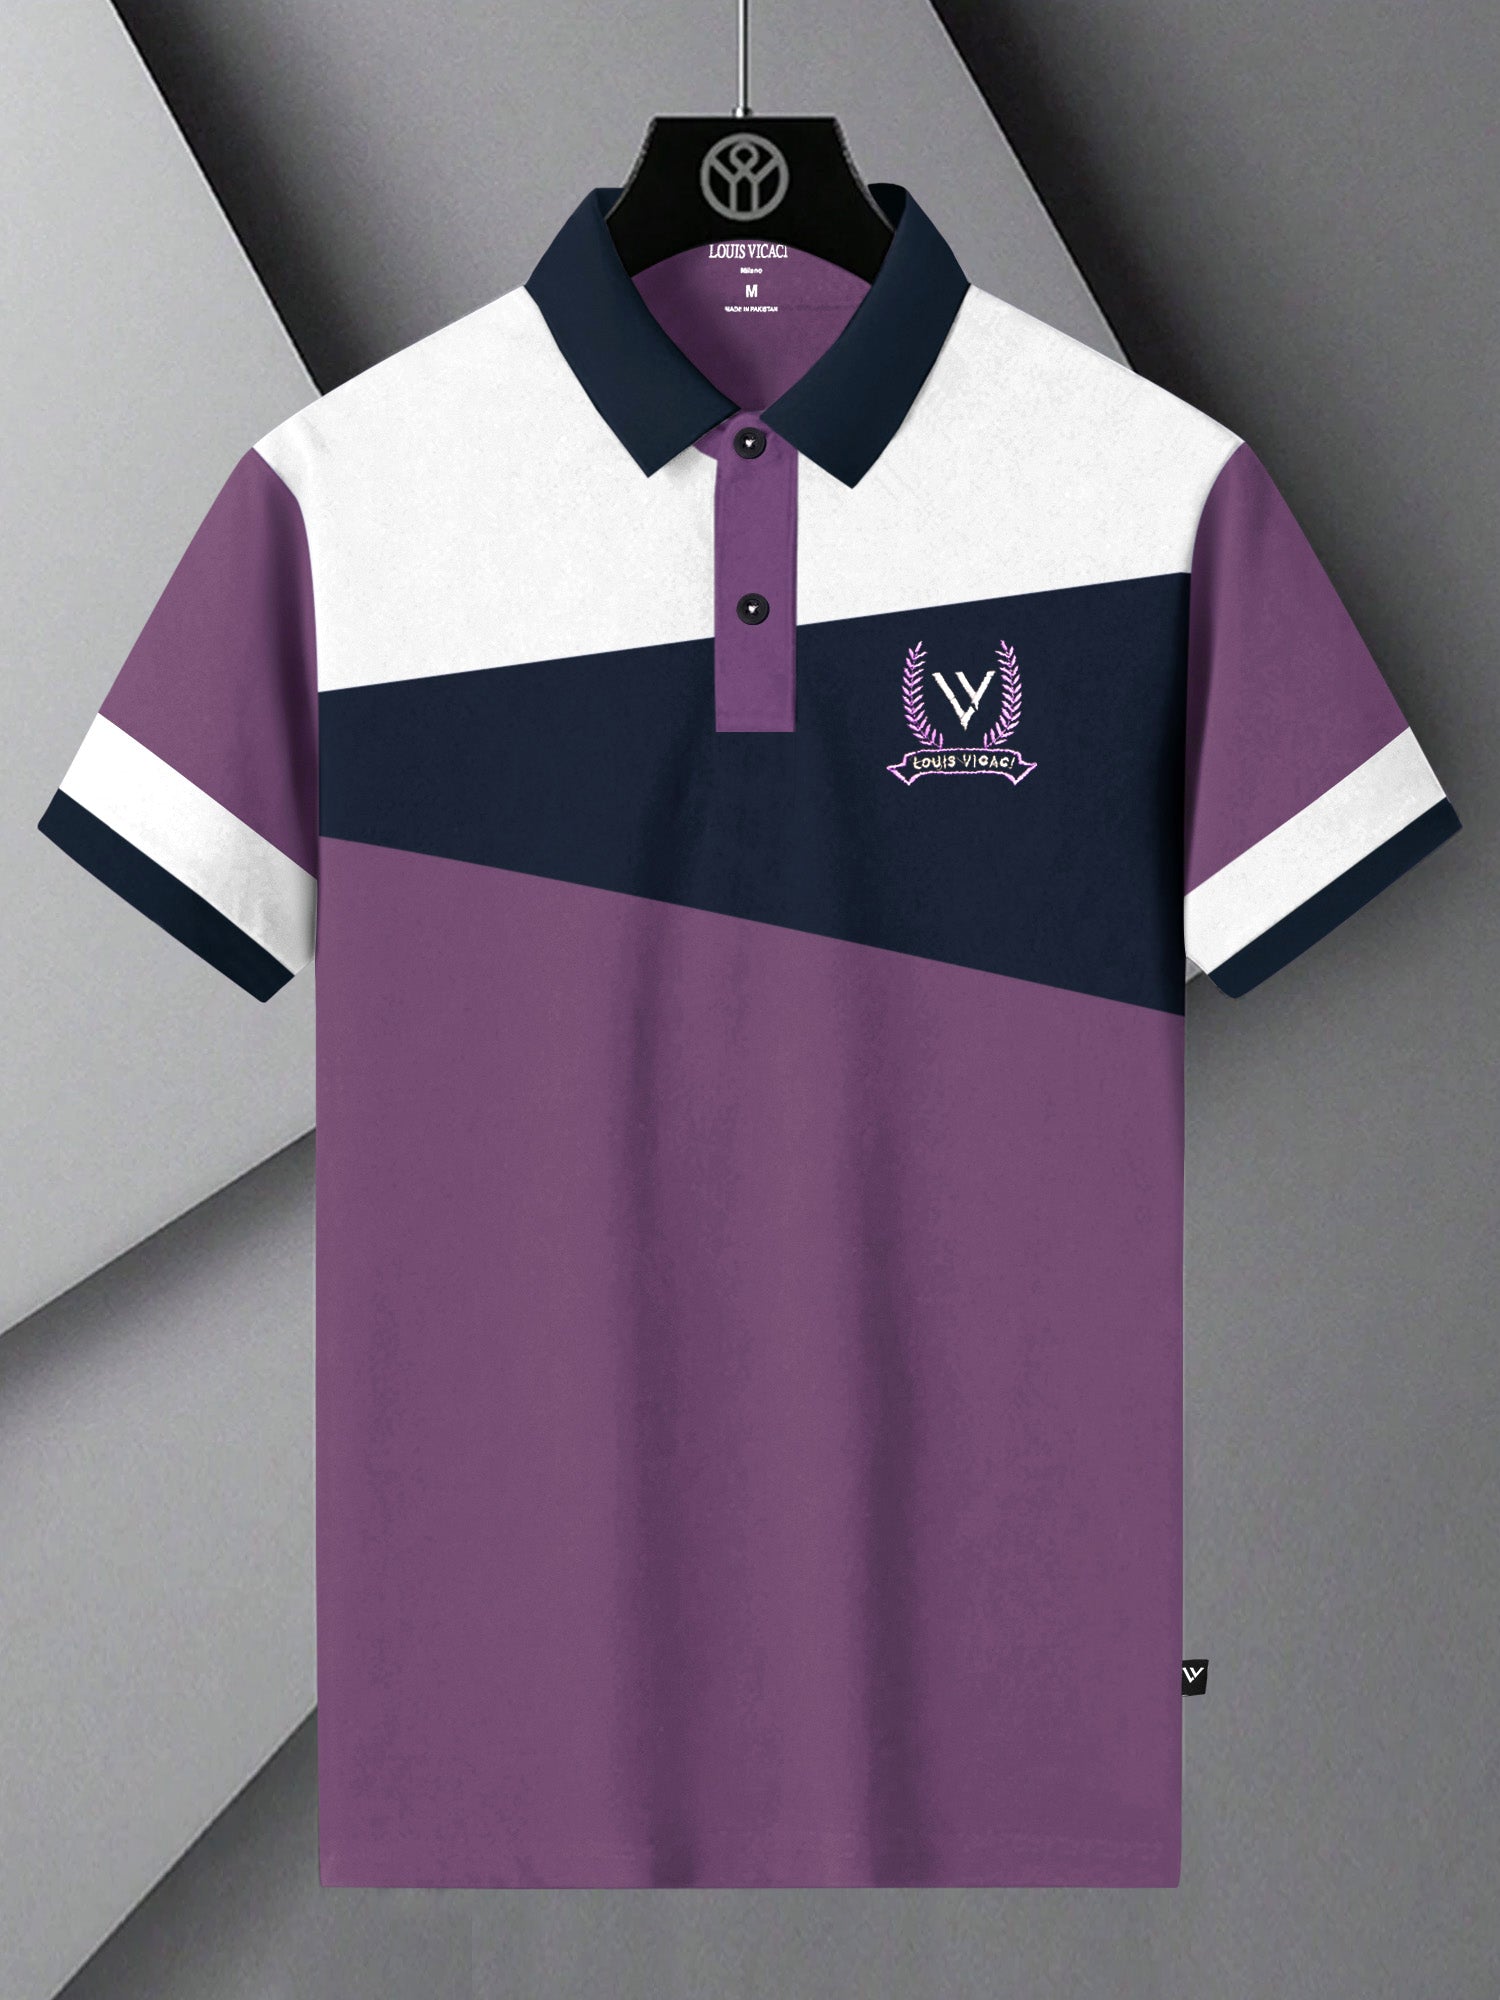 LV Summer Polo Shirt For Men-Purple with Navy & White Panel-BE832/BR13071